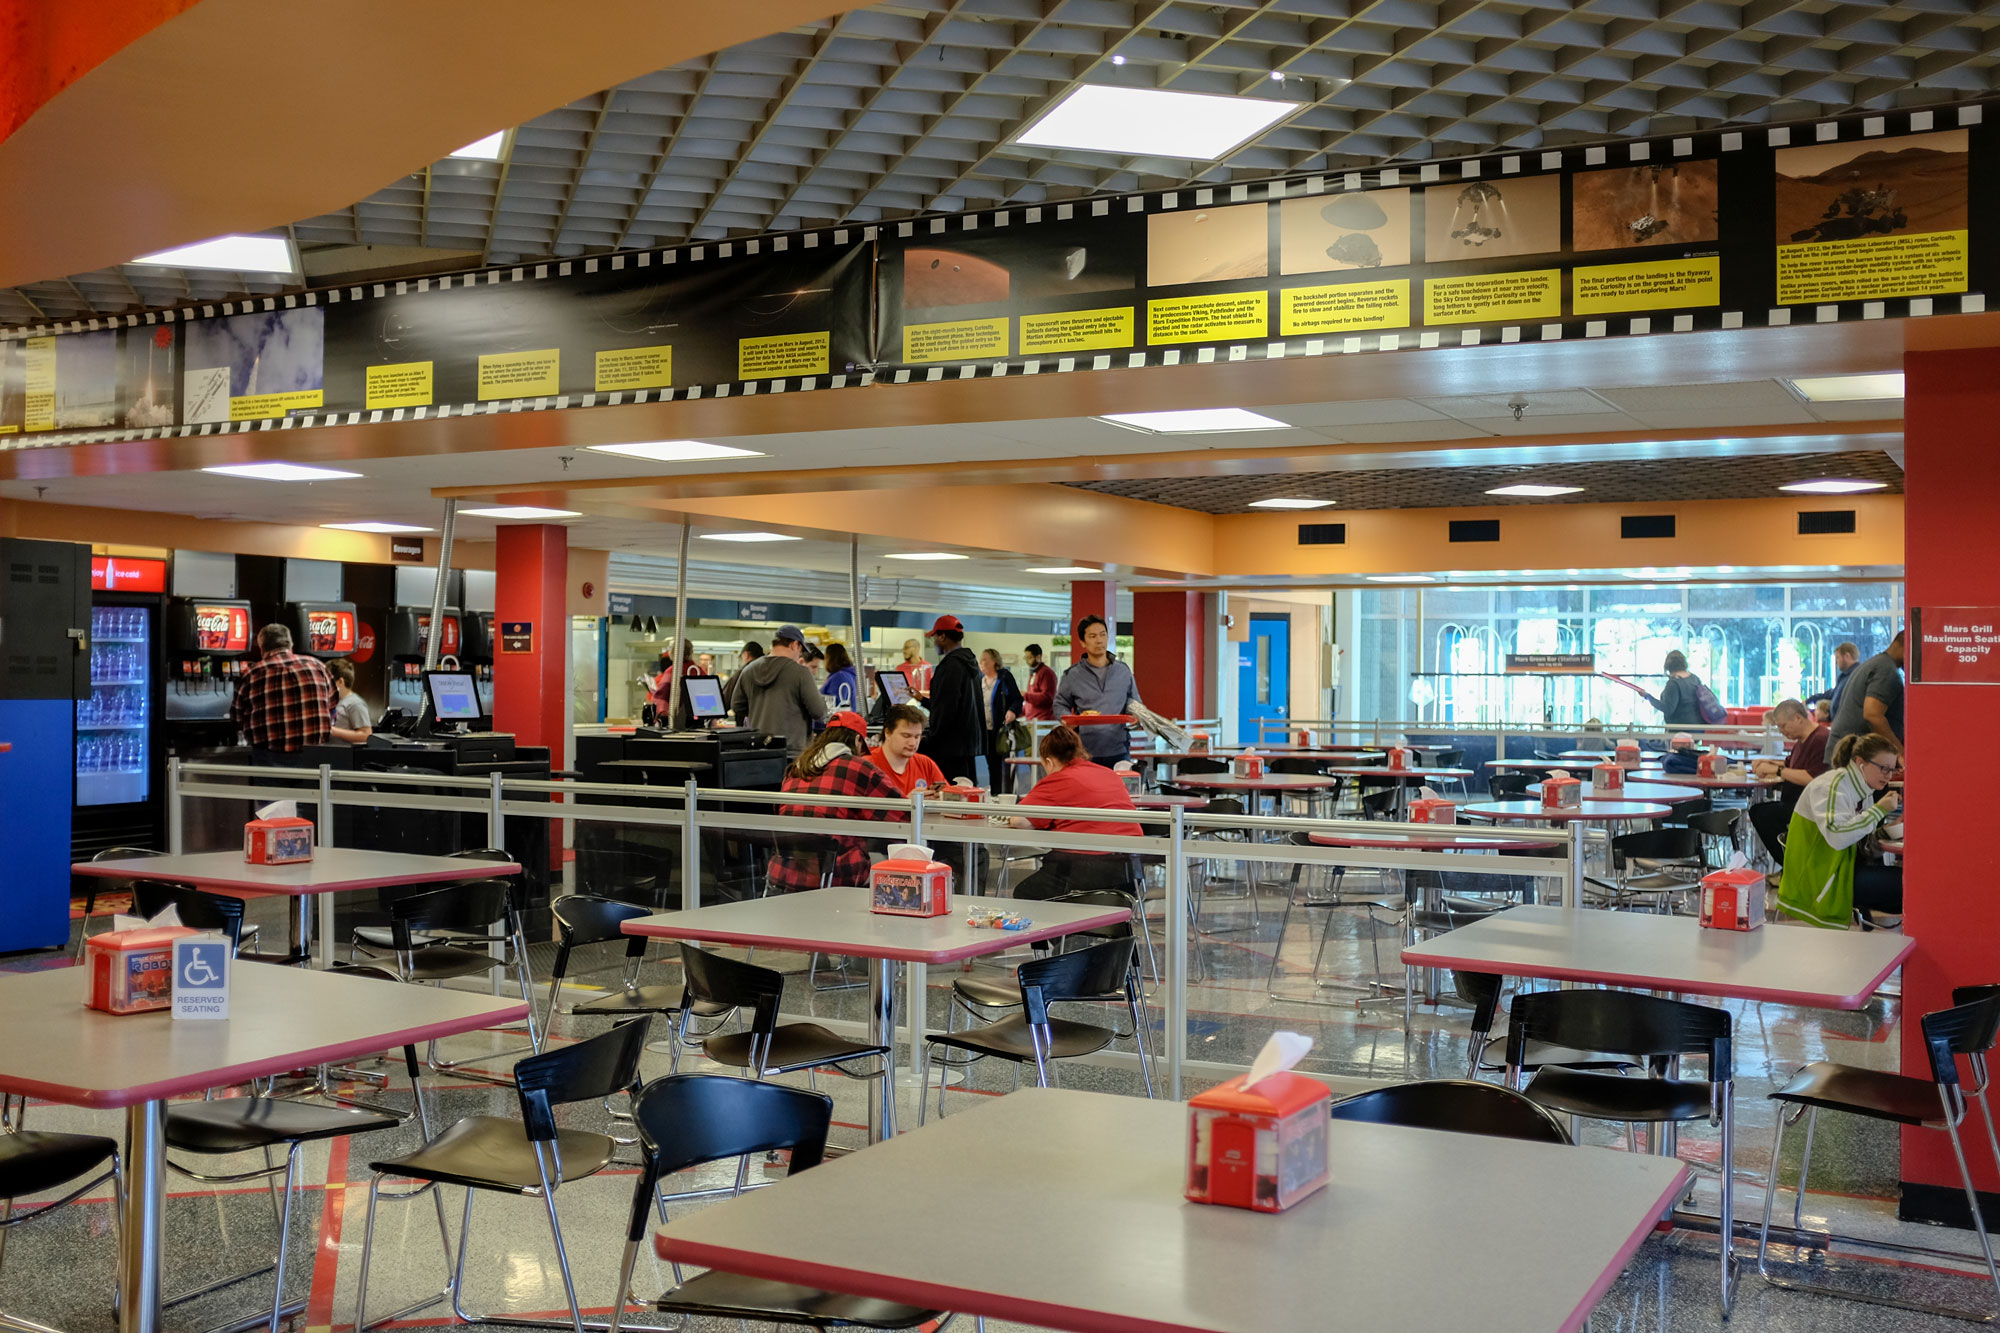 People dine in the cafeteria at U.S. Space & Rocket Center